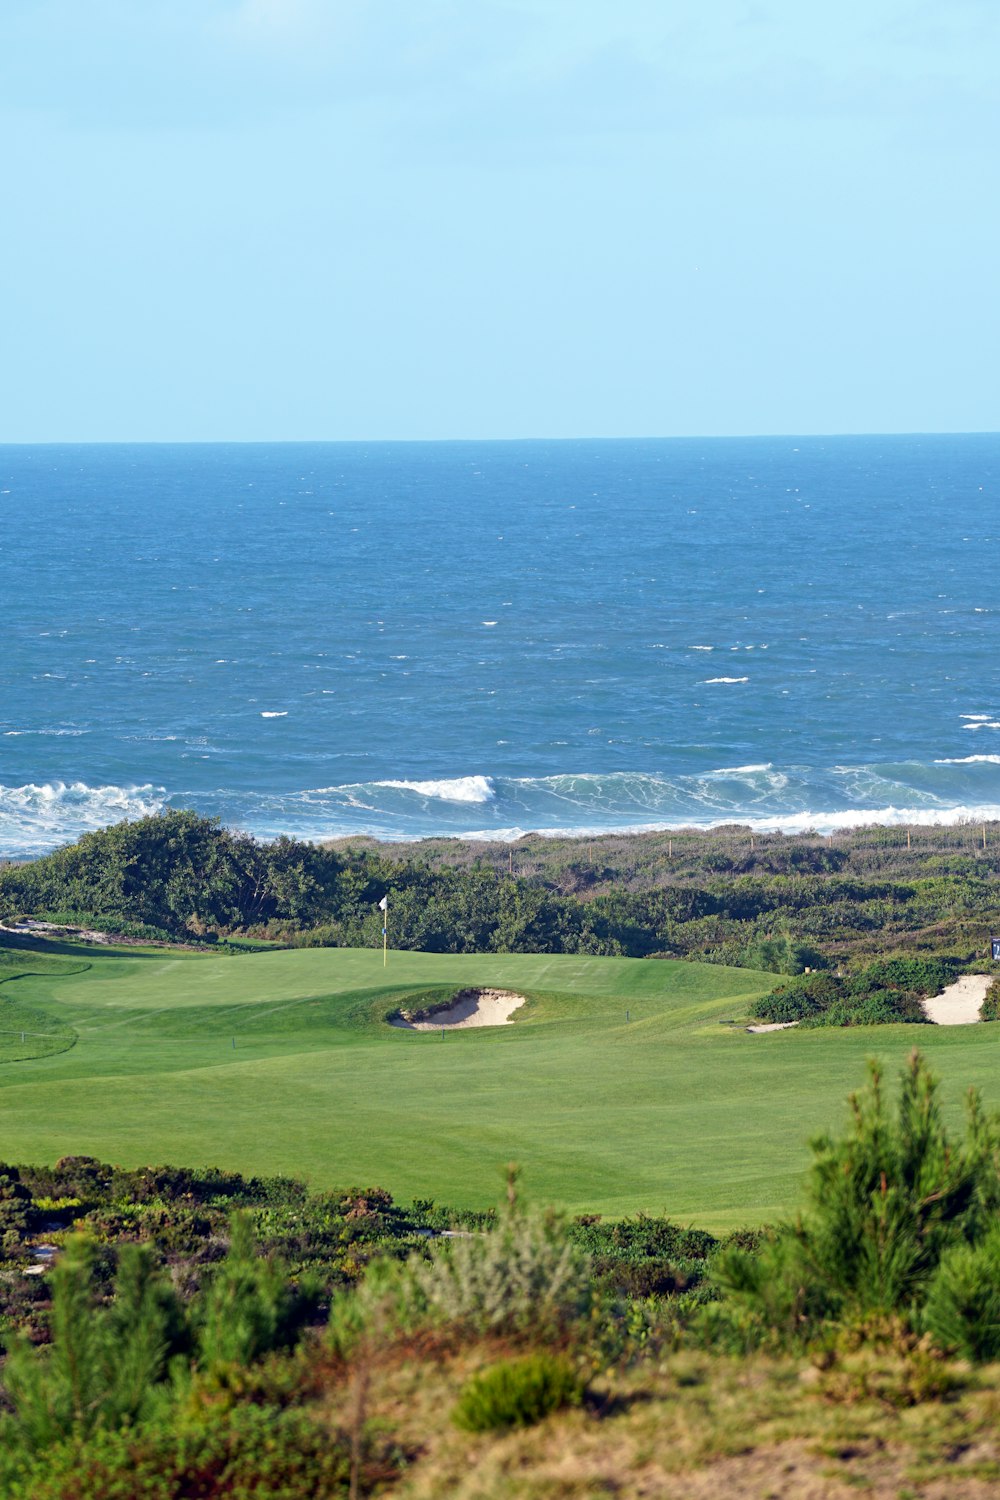 a view of a golf course with the ocean in the background